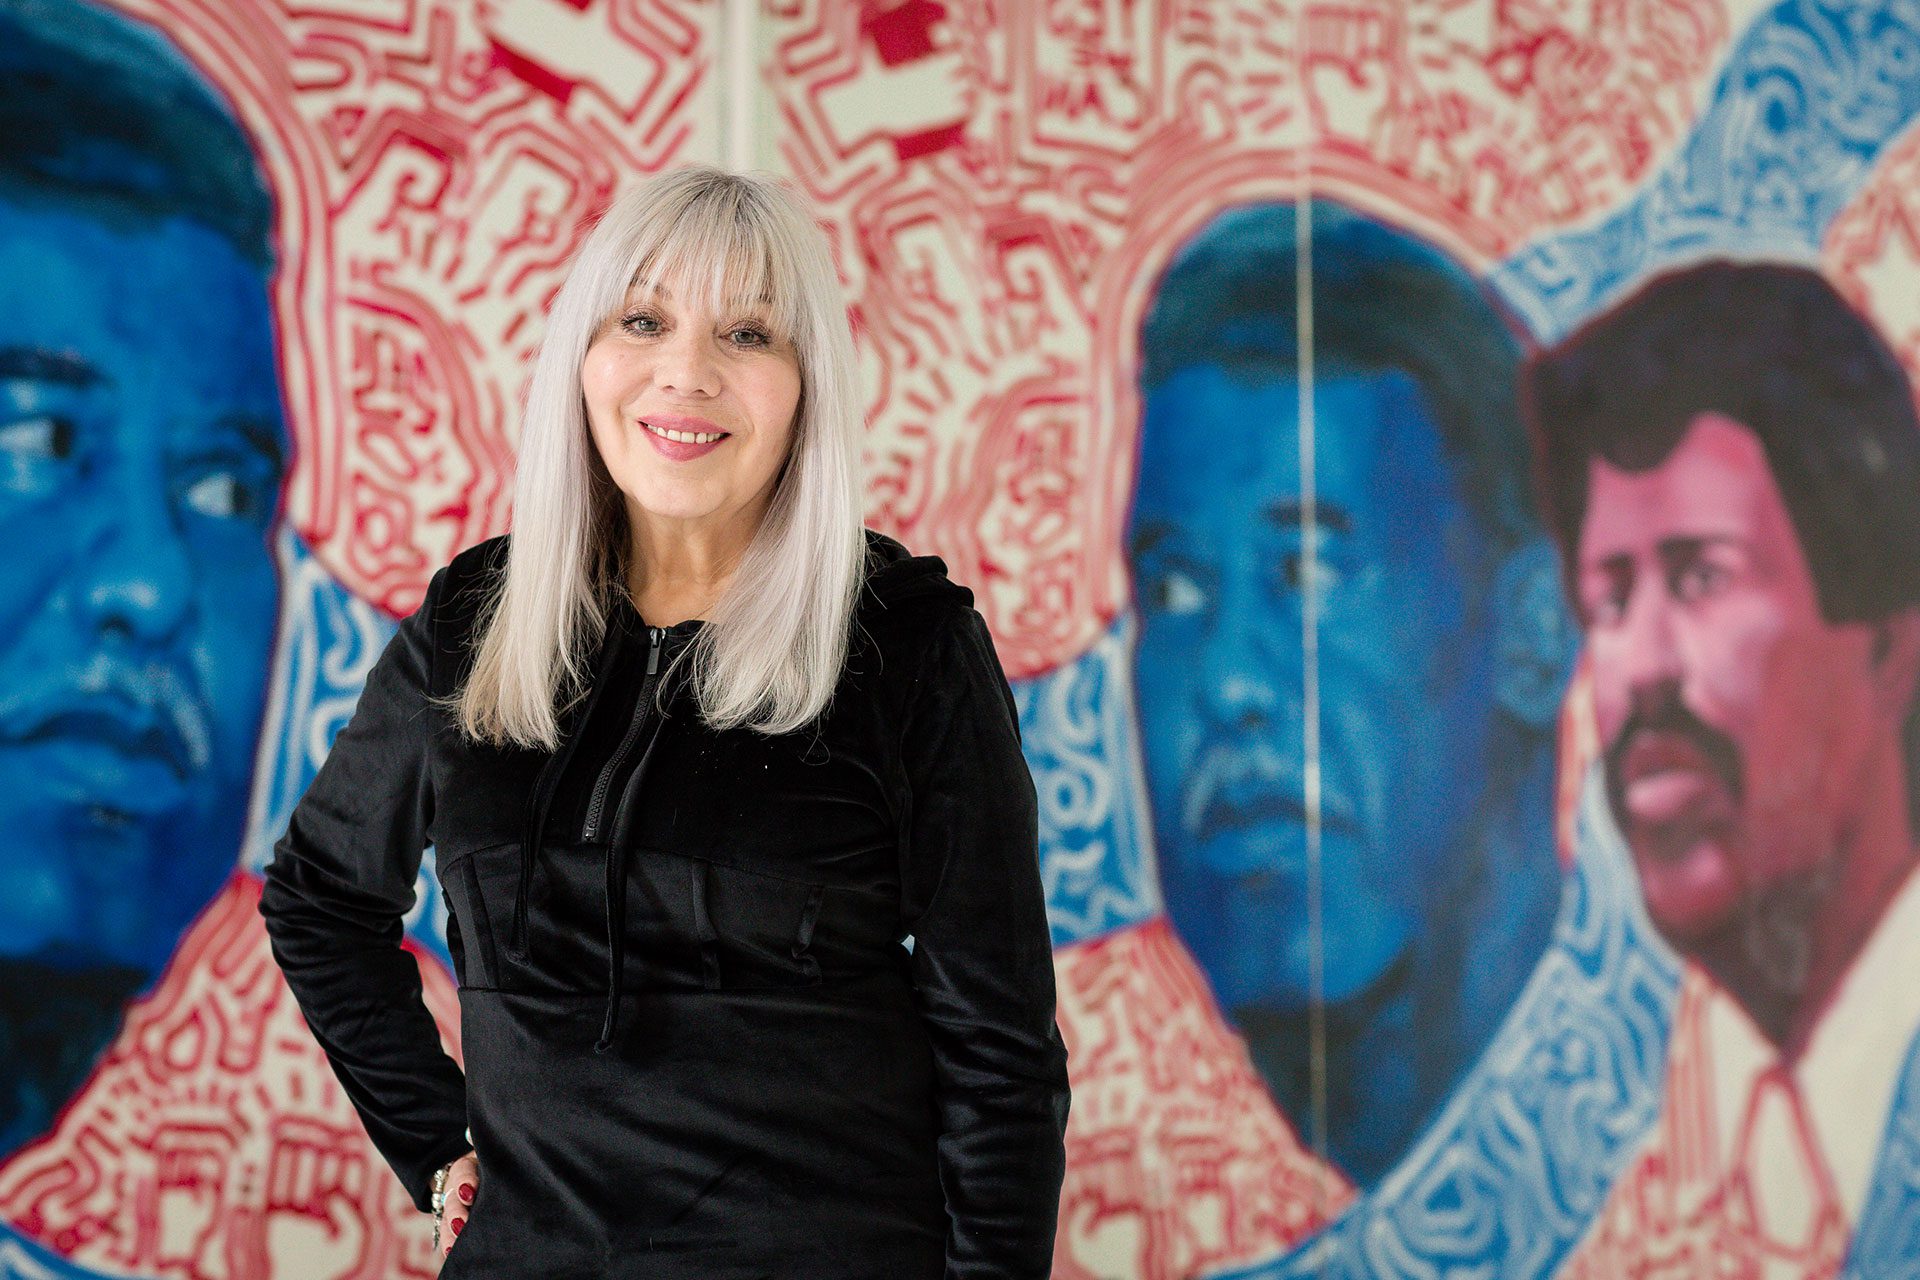 Organizer and pastor Emma Lozano, wearing a black hoodie, poses in front of a mural that depicts Chicago mayor Harold Washington and Lozano’s brother, Rudy Lozano.